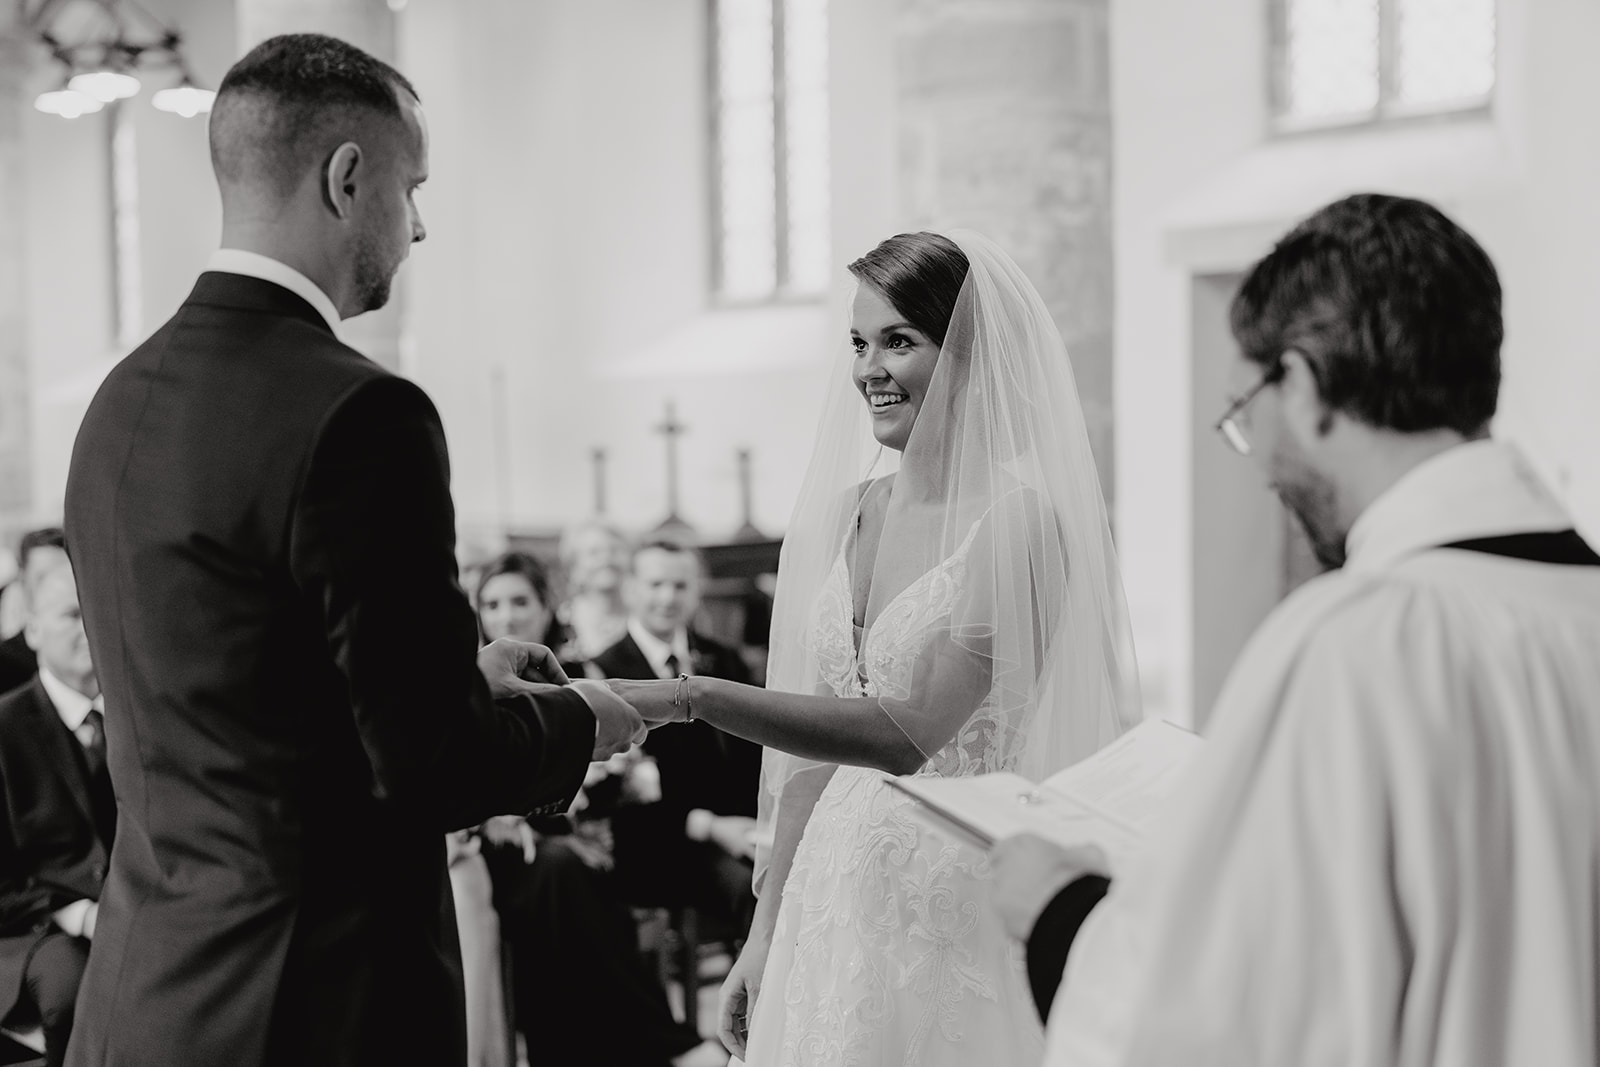 Bride and groom exchange rings during their wedding ceremony
